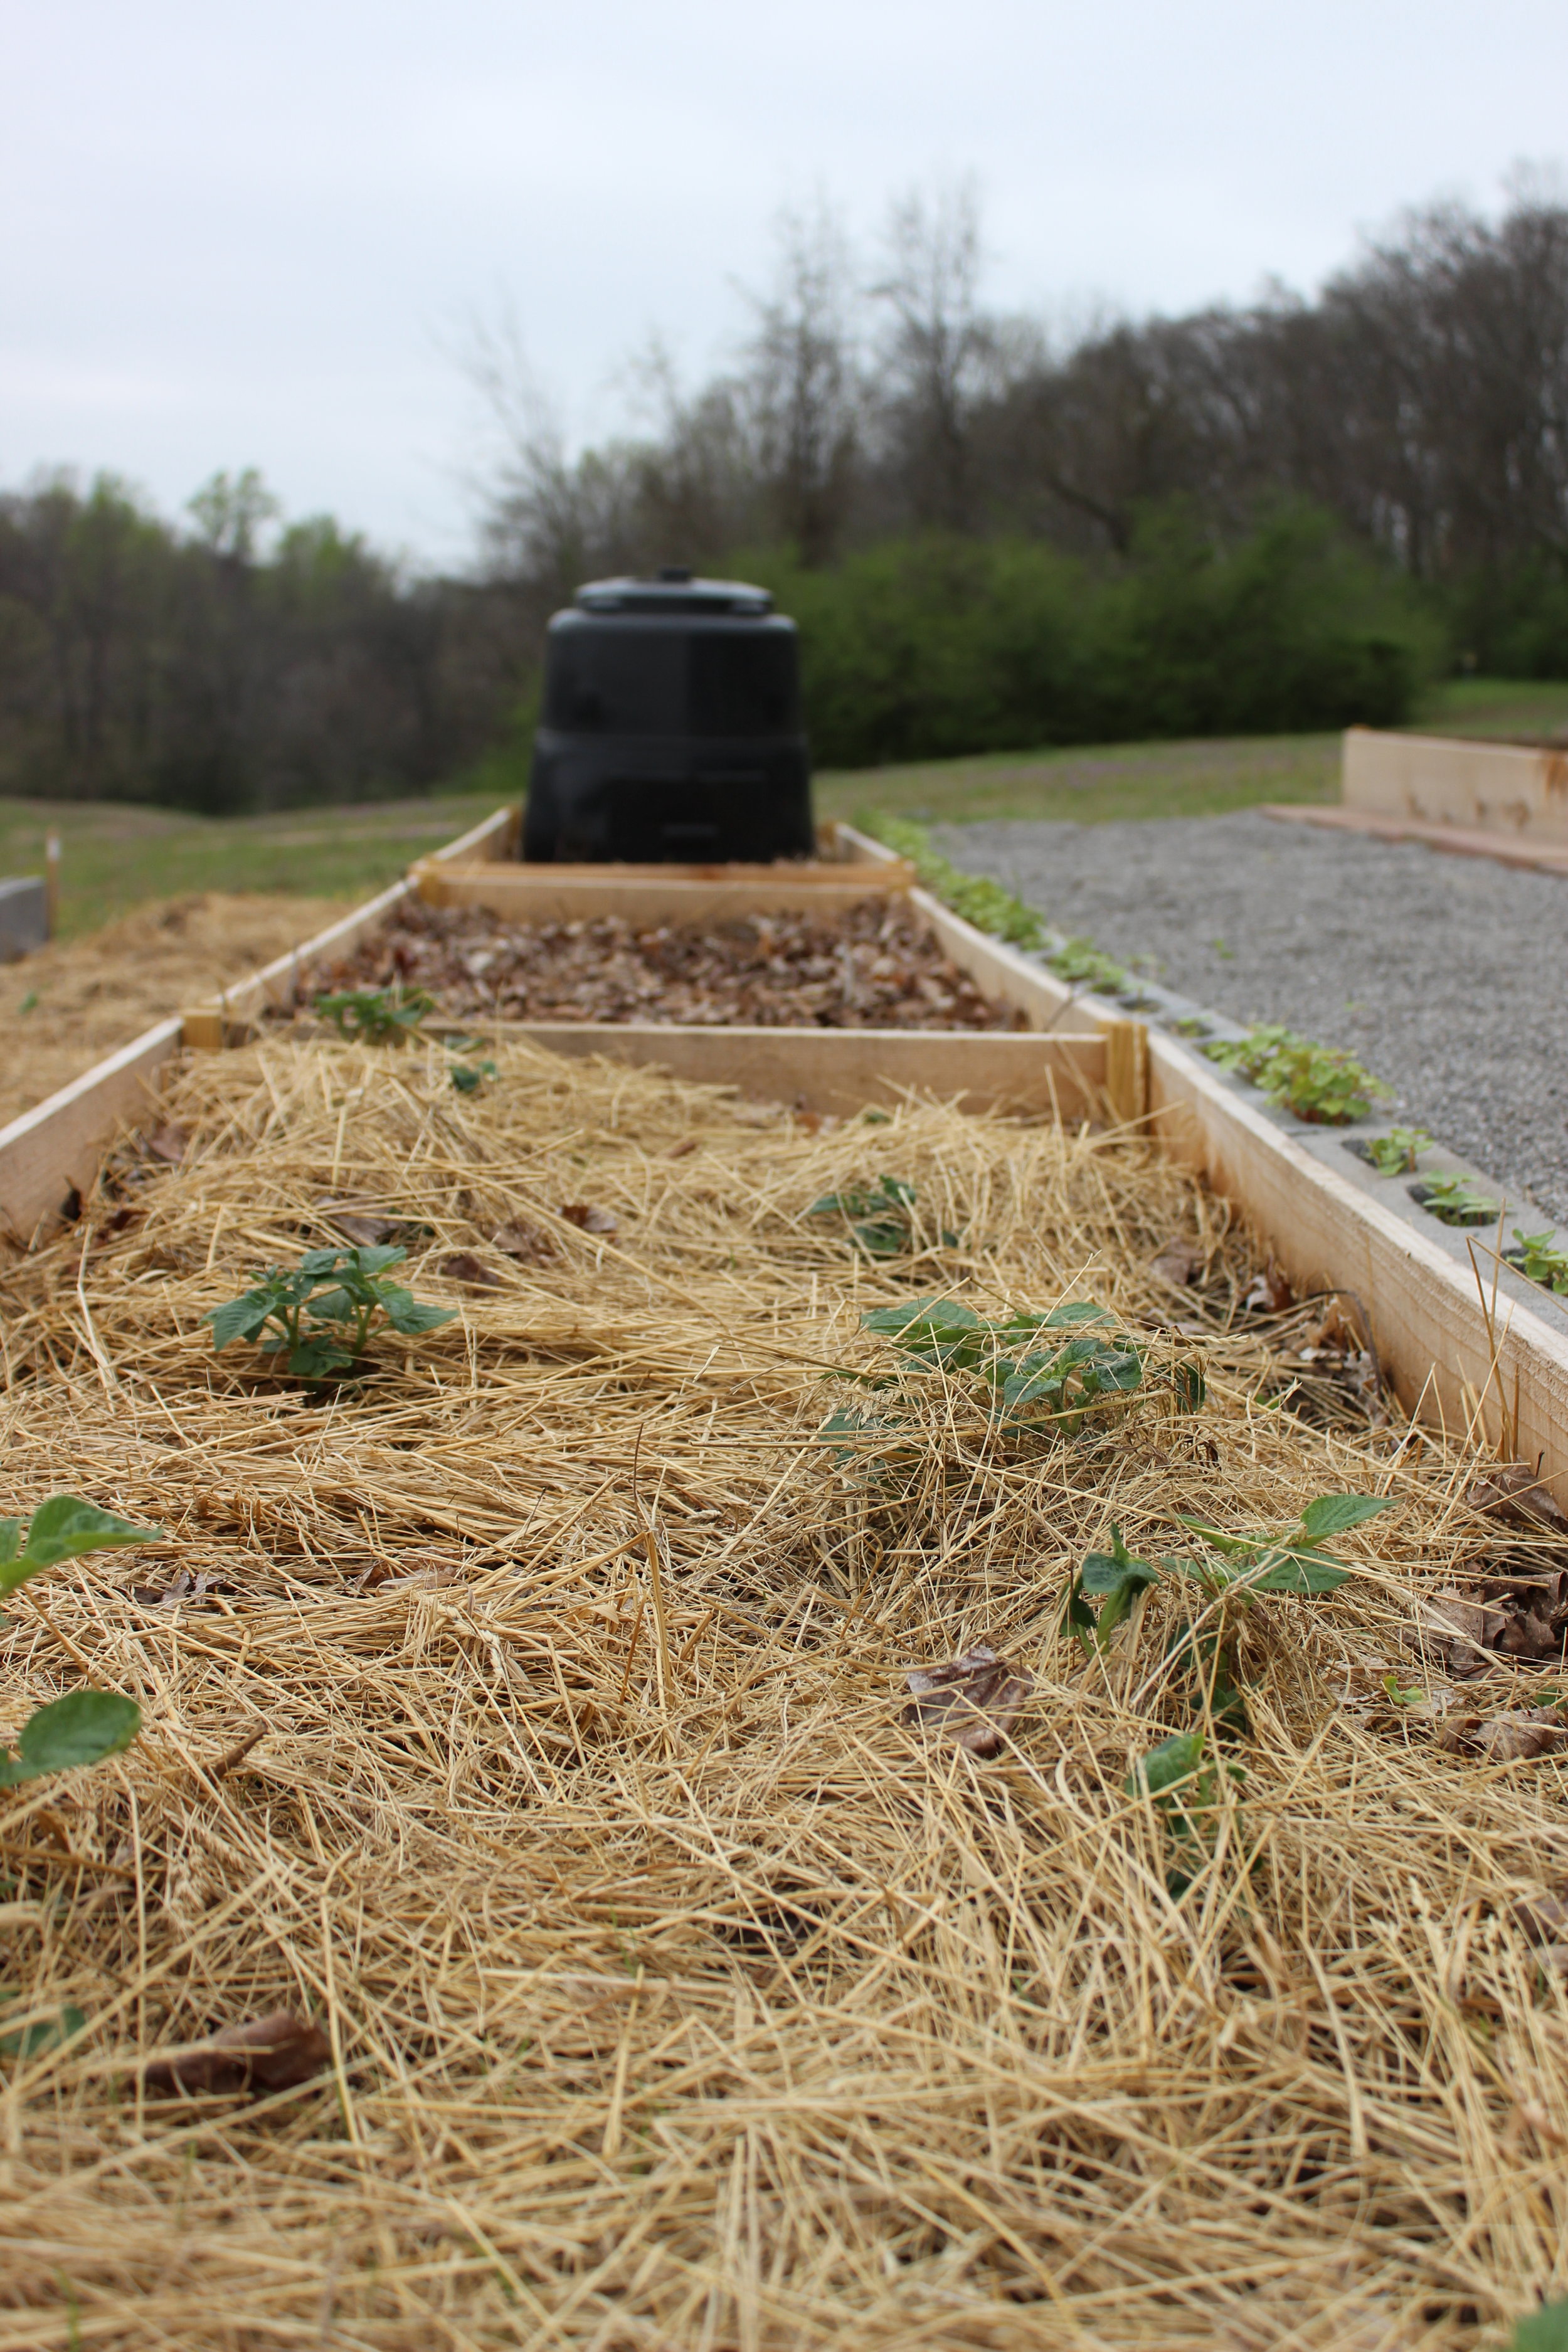  Students wasted no time planting in potatoes! 